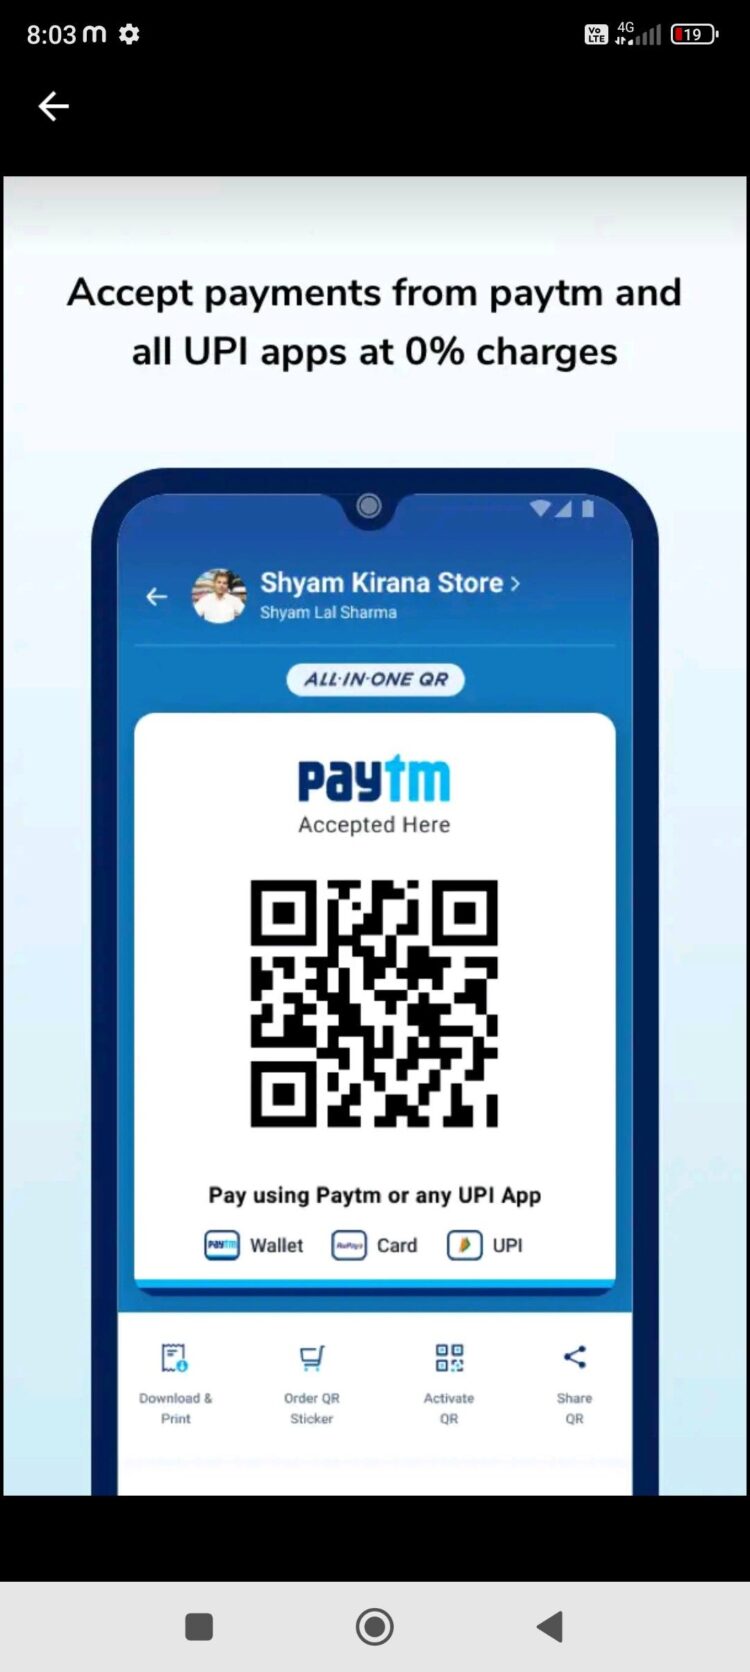 Paytm Customer Care Number ❽❽❹⓿❹❷❸❸❾❸ Toll-Free